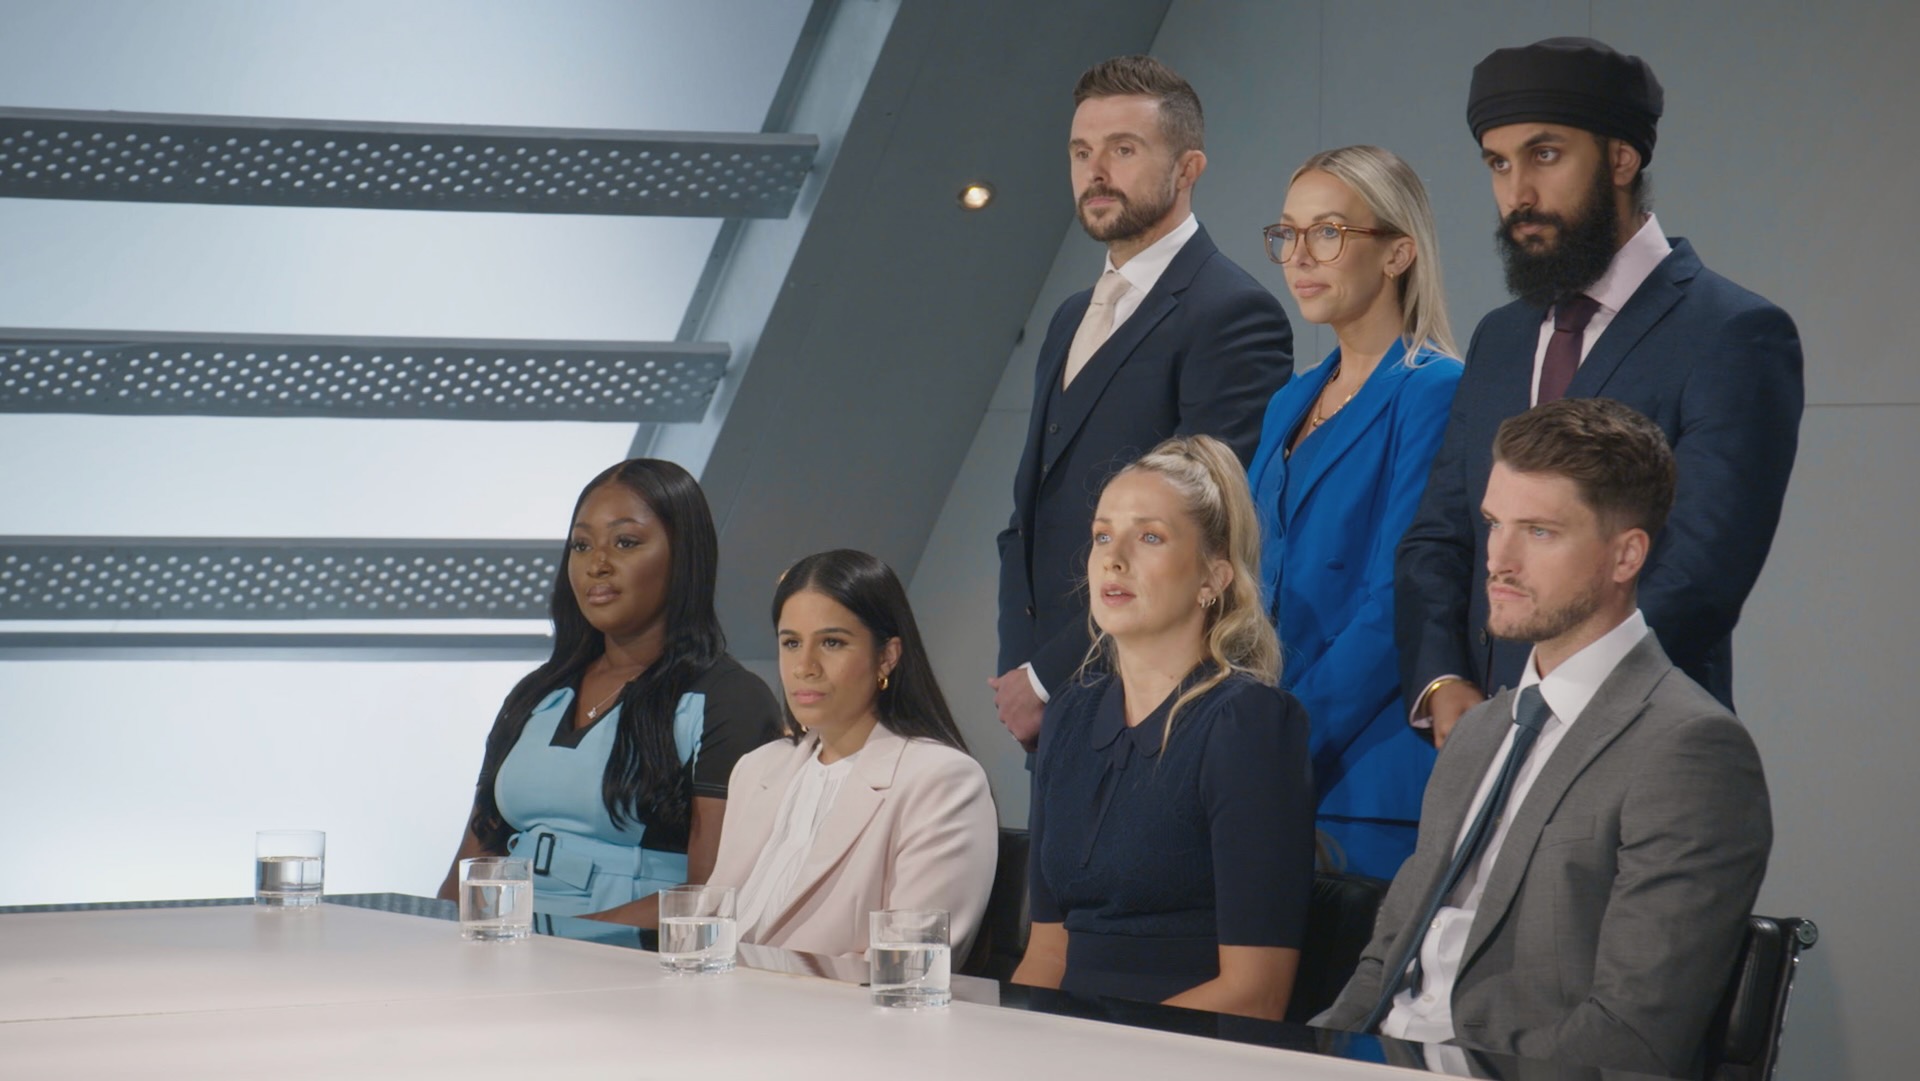 The Apprentice candidates in the boardroom